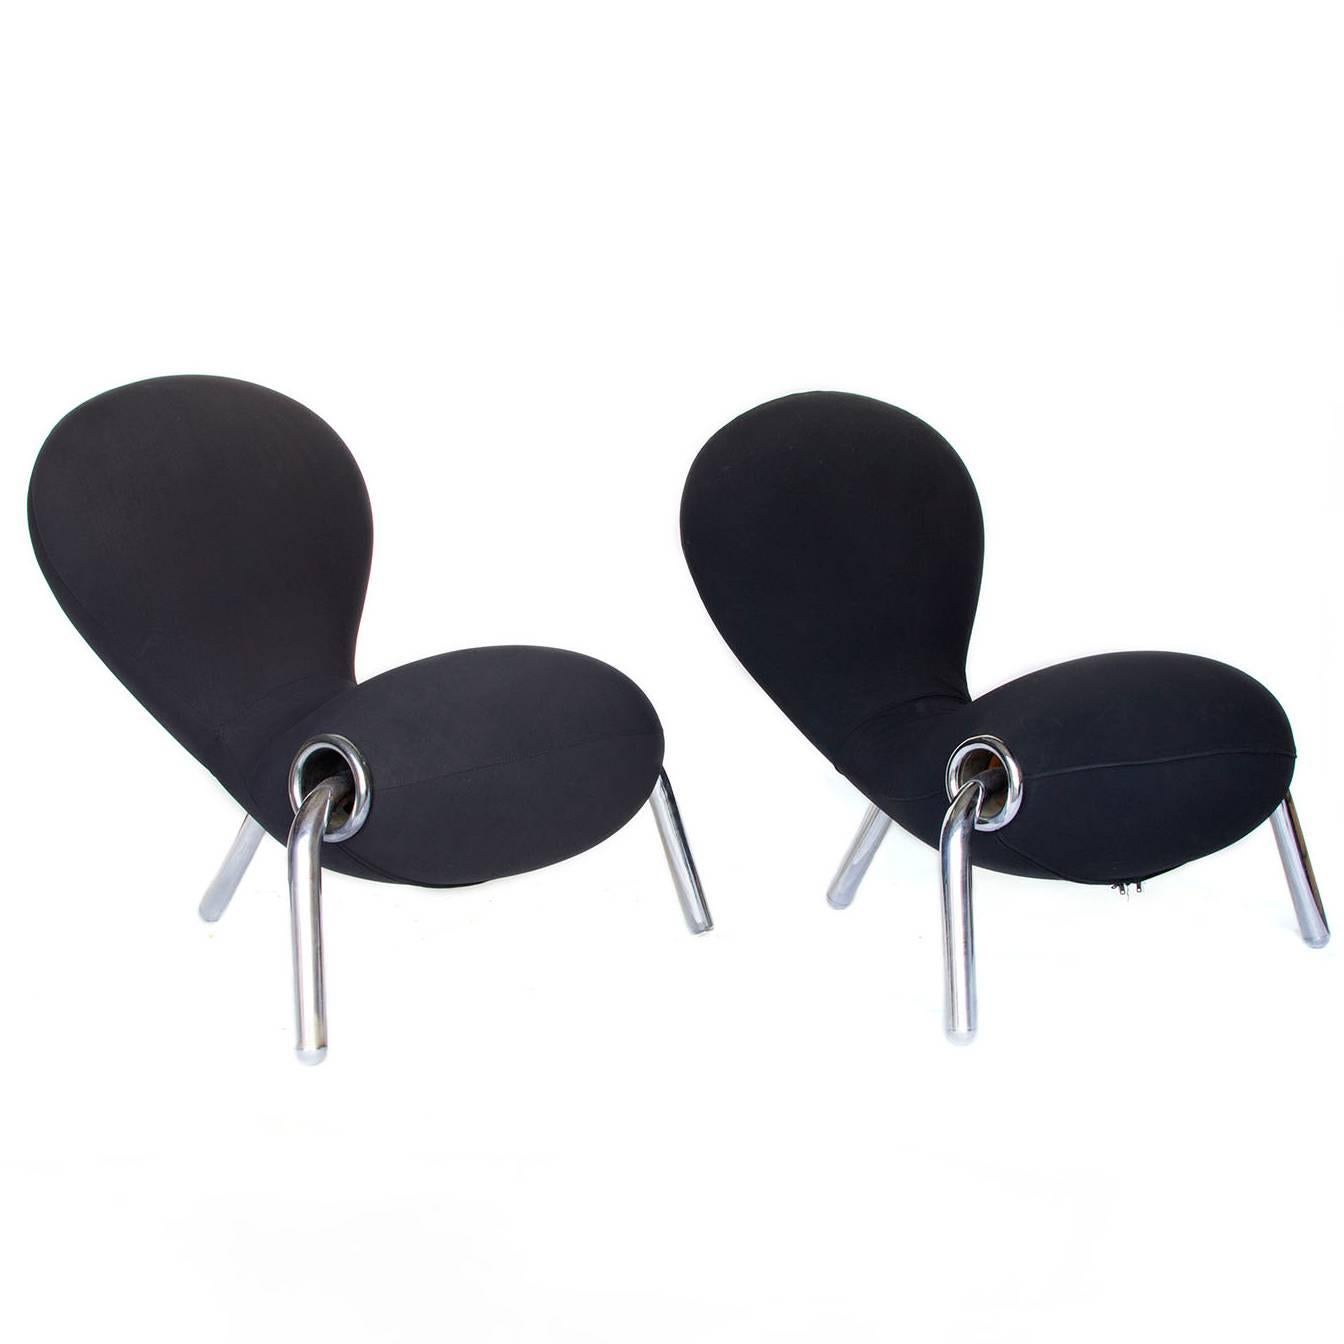 1988, Marc Newson, 2 x Black "Embryo" Lounge Chair for Cappellin